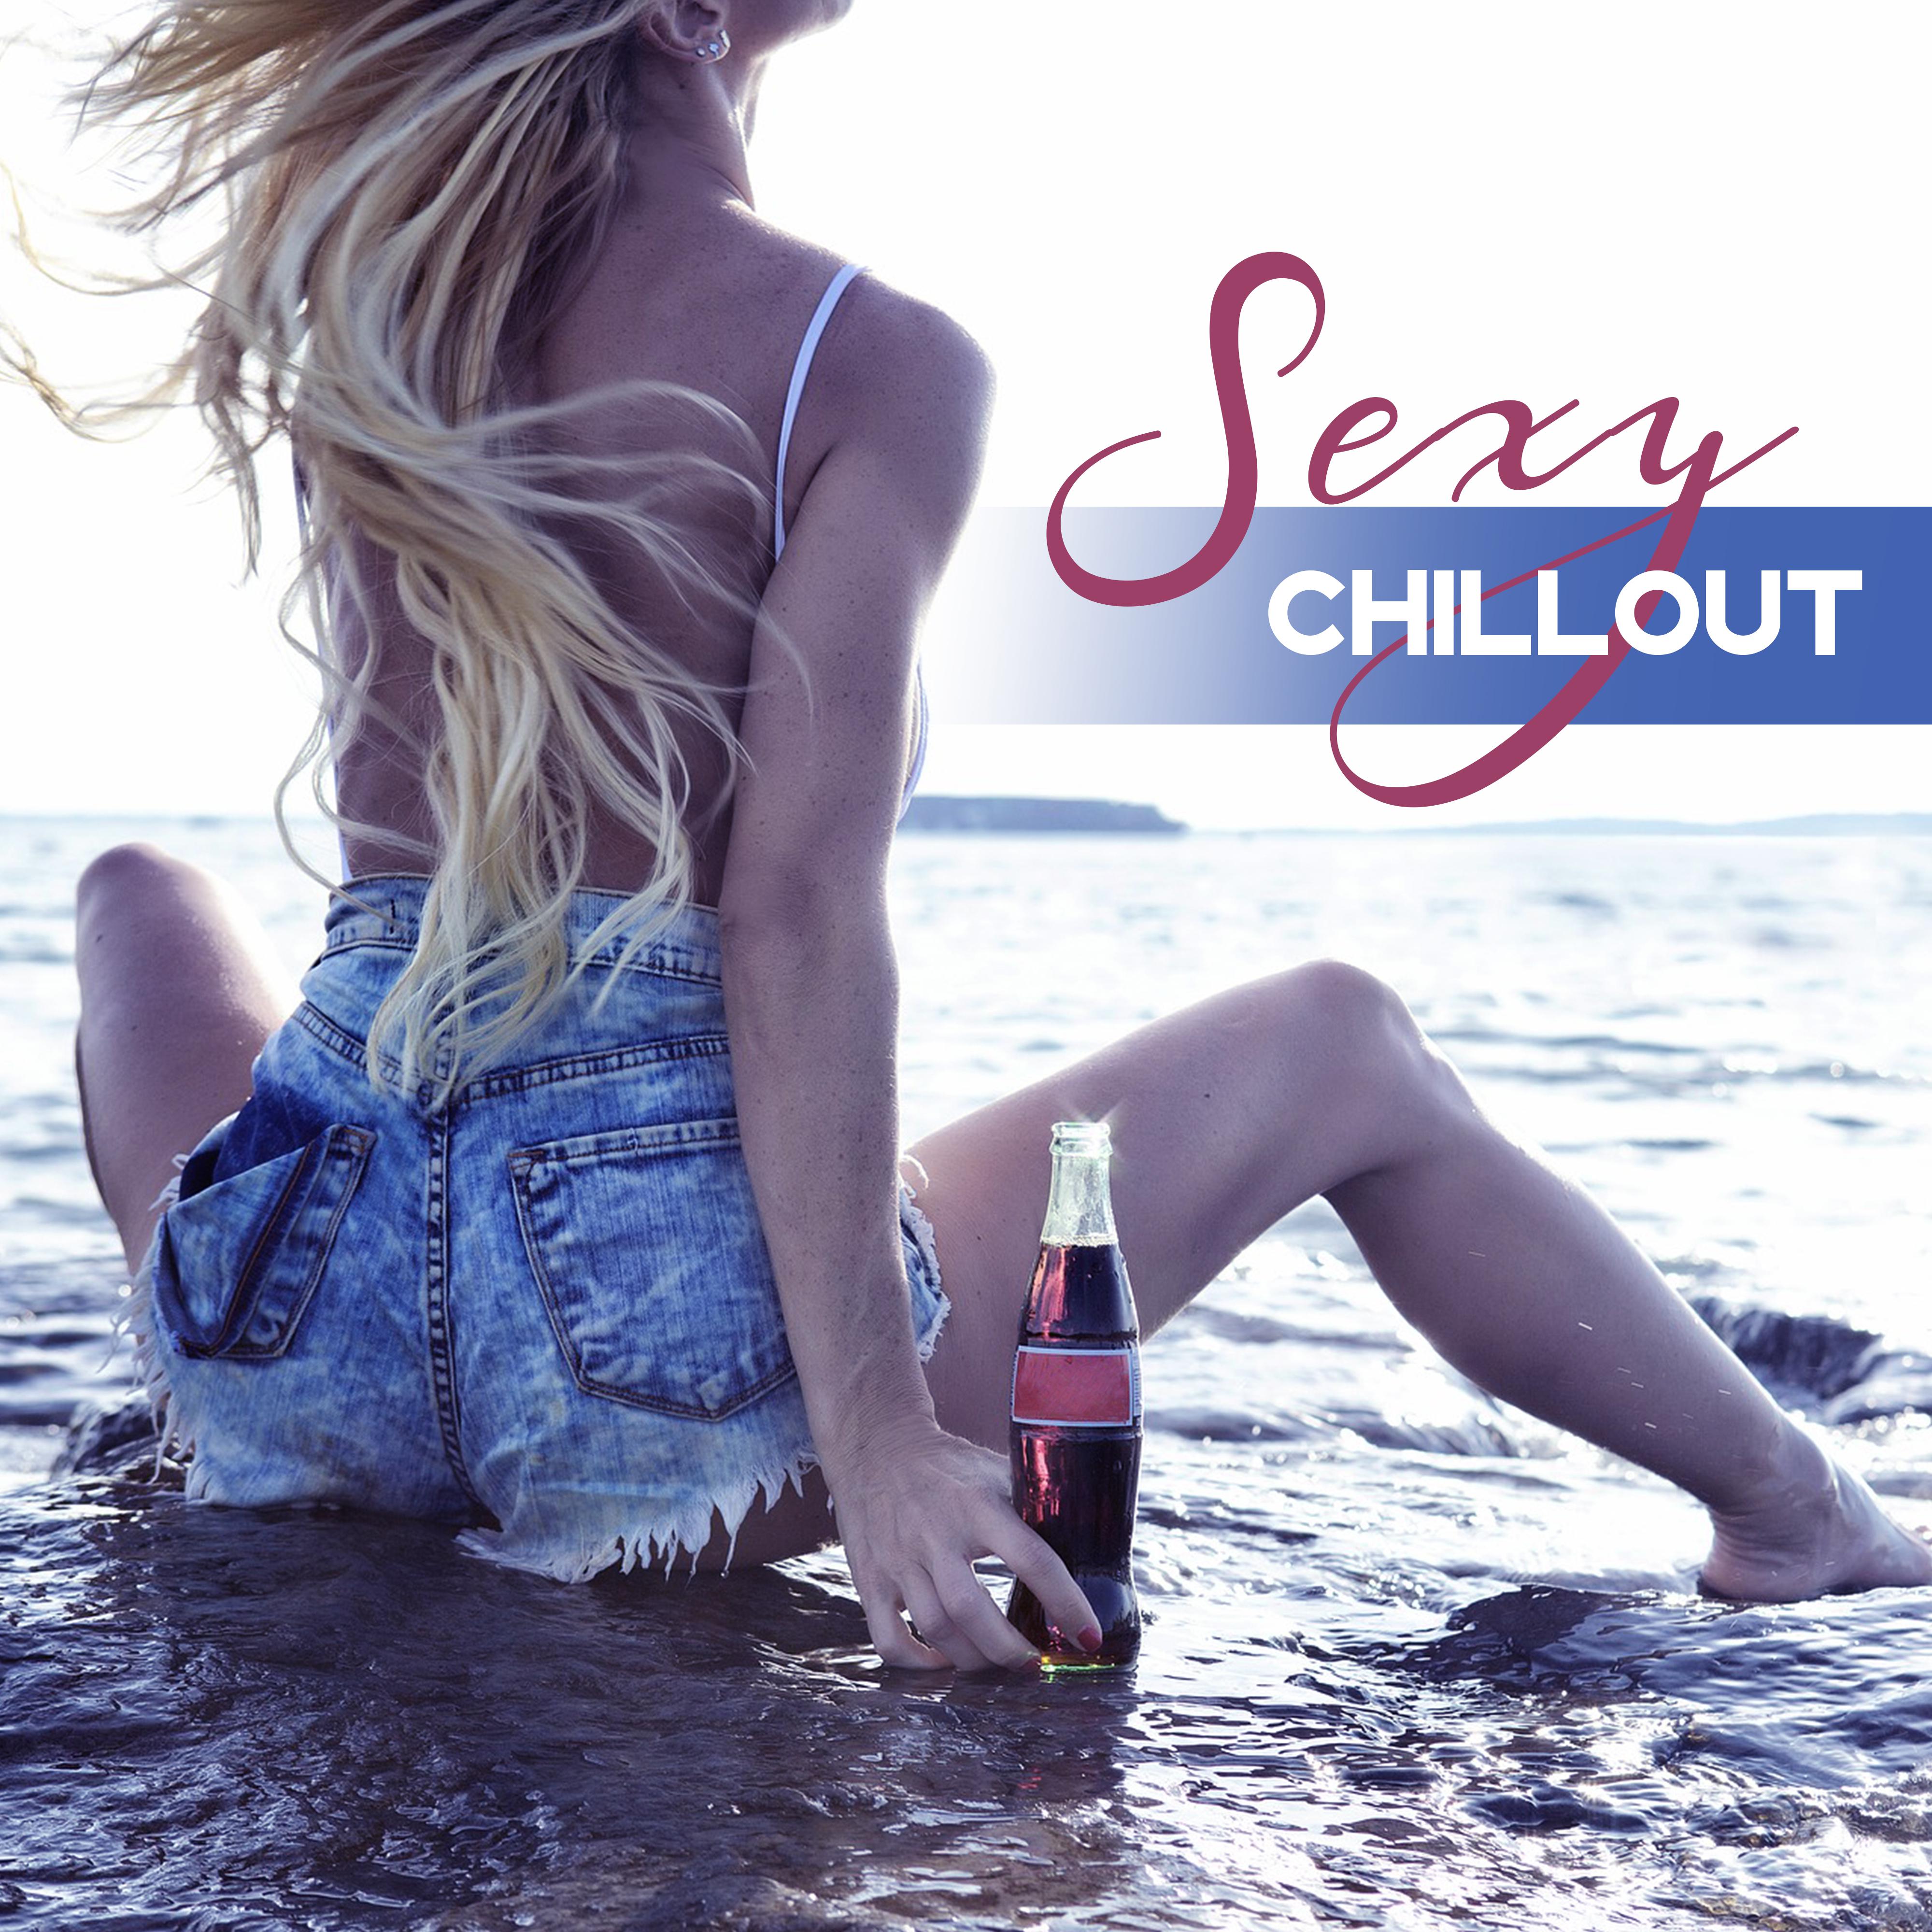 Sexy Chillout – Deep Breathe, Chill Out Music, Summer Relax, Chill Out Club